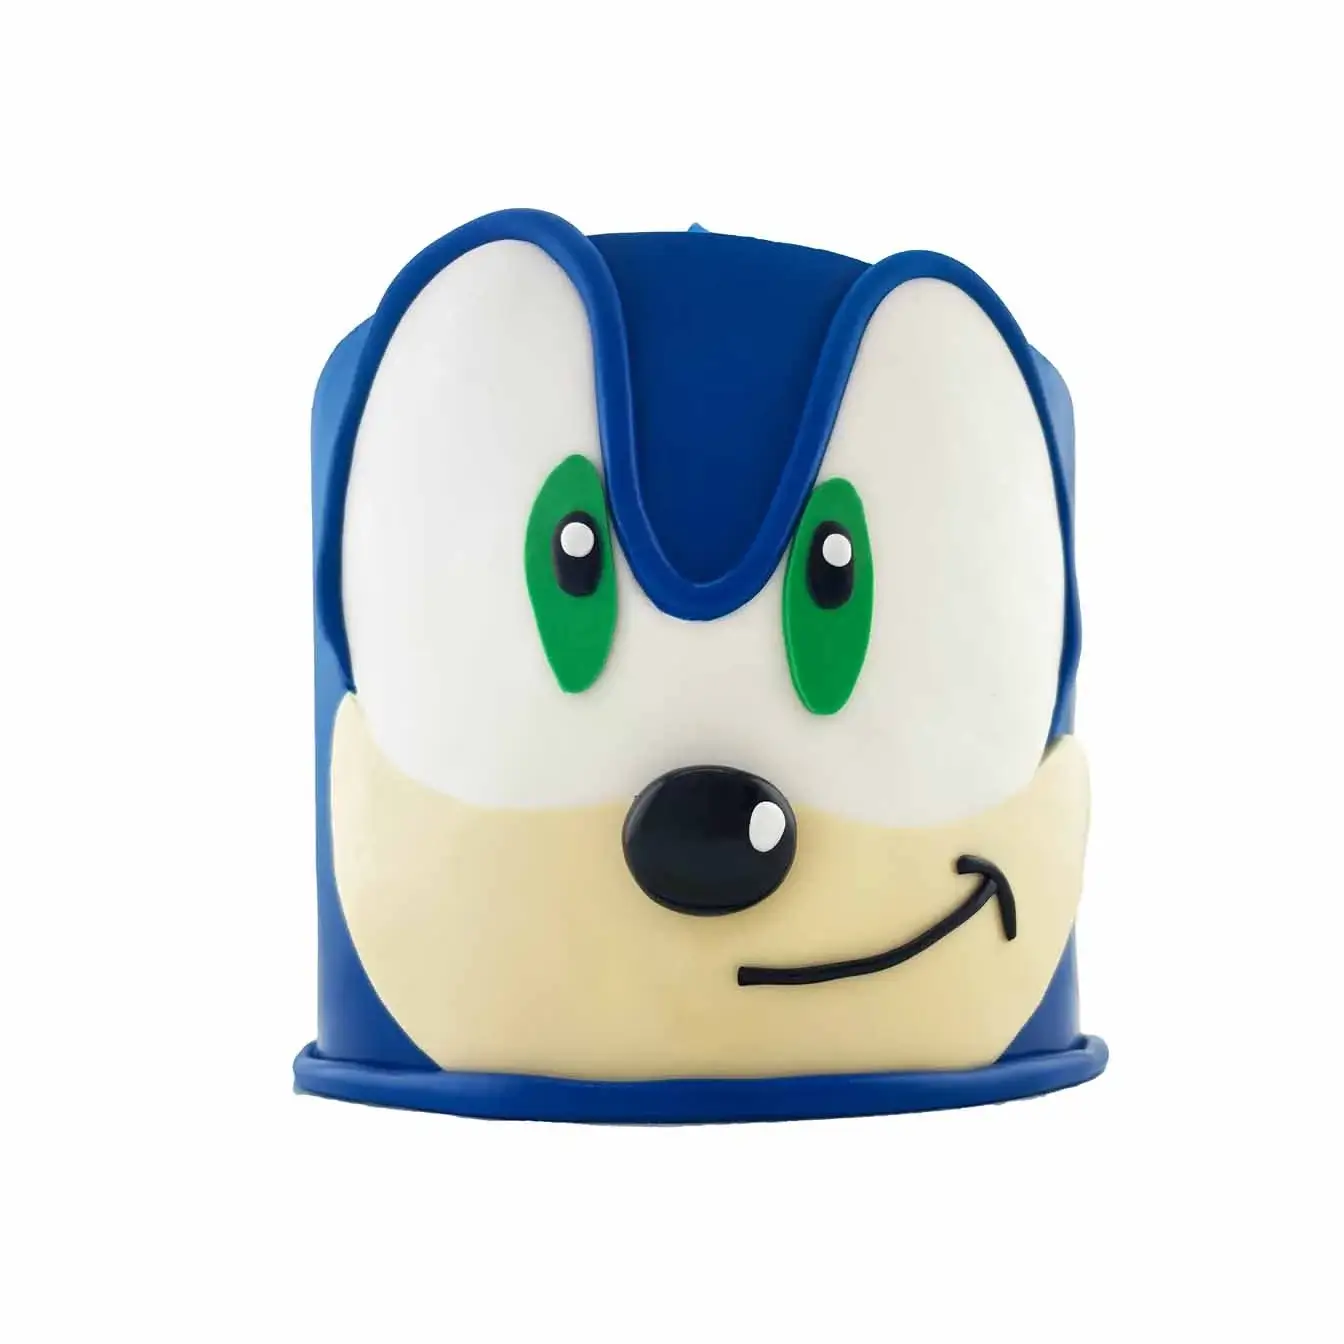 Sonic the Hedgehog cake designed to look like the iconic blue video game character, with red sneakers and a friendly smile, ideal for a Sonic-themed party or celebration.